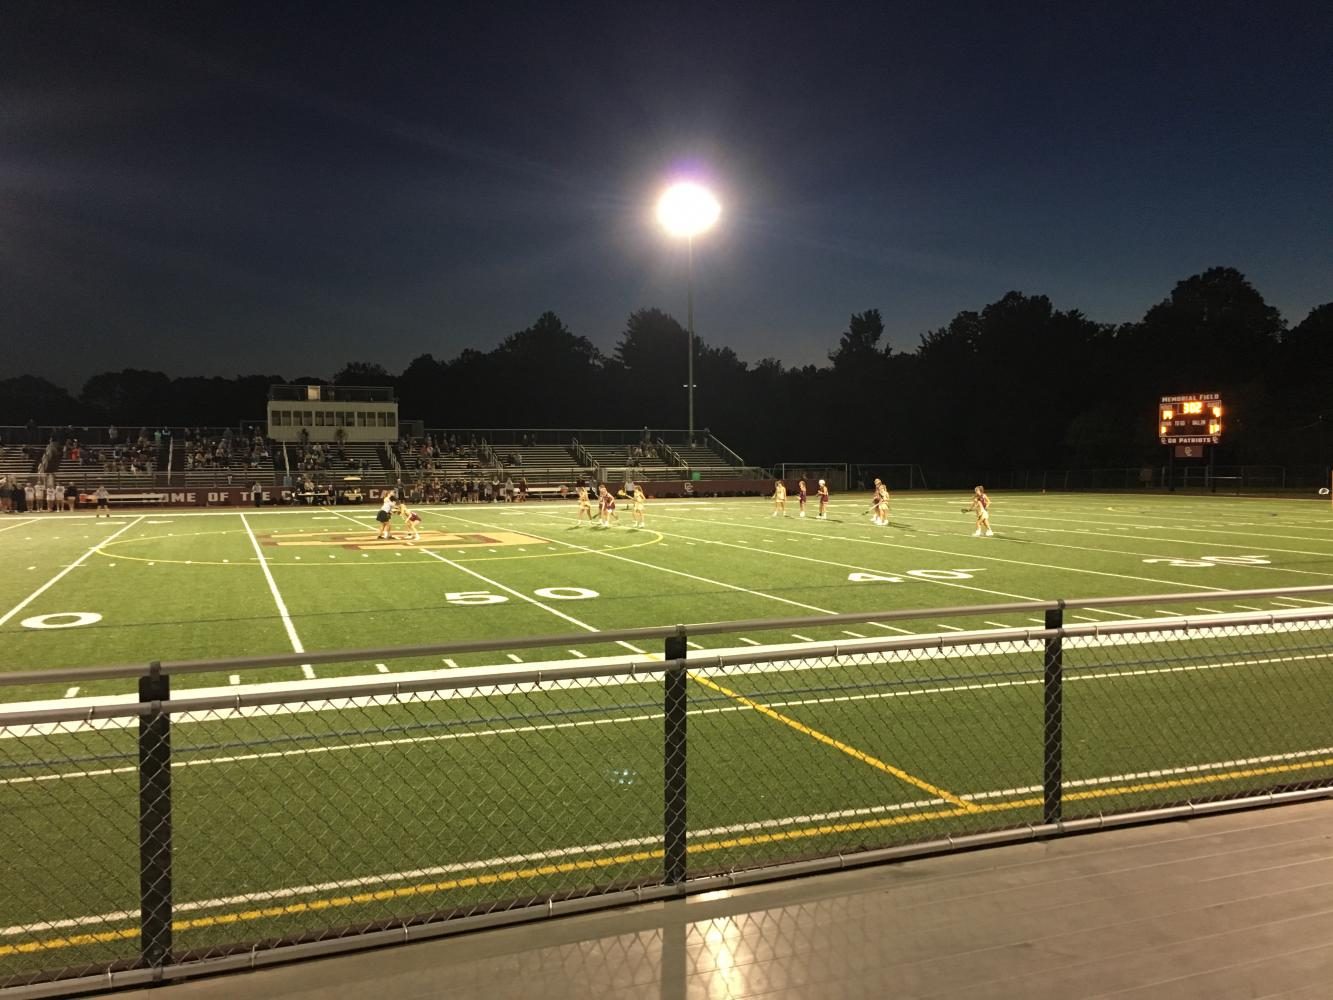 The second half of the game was played under the lights at CC